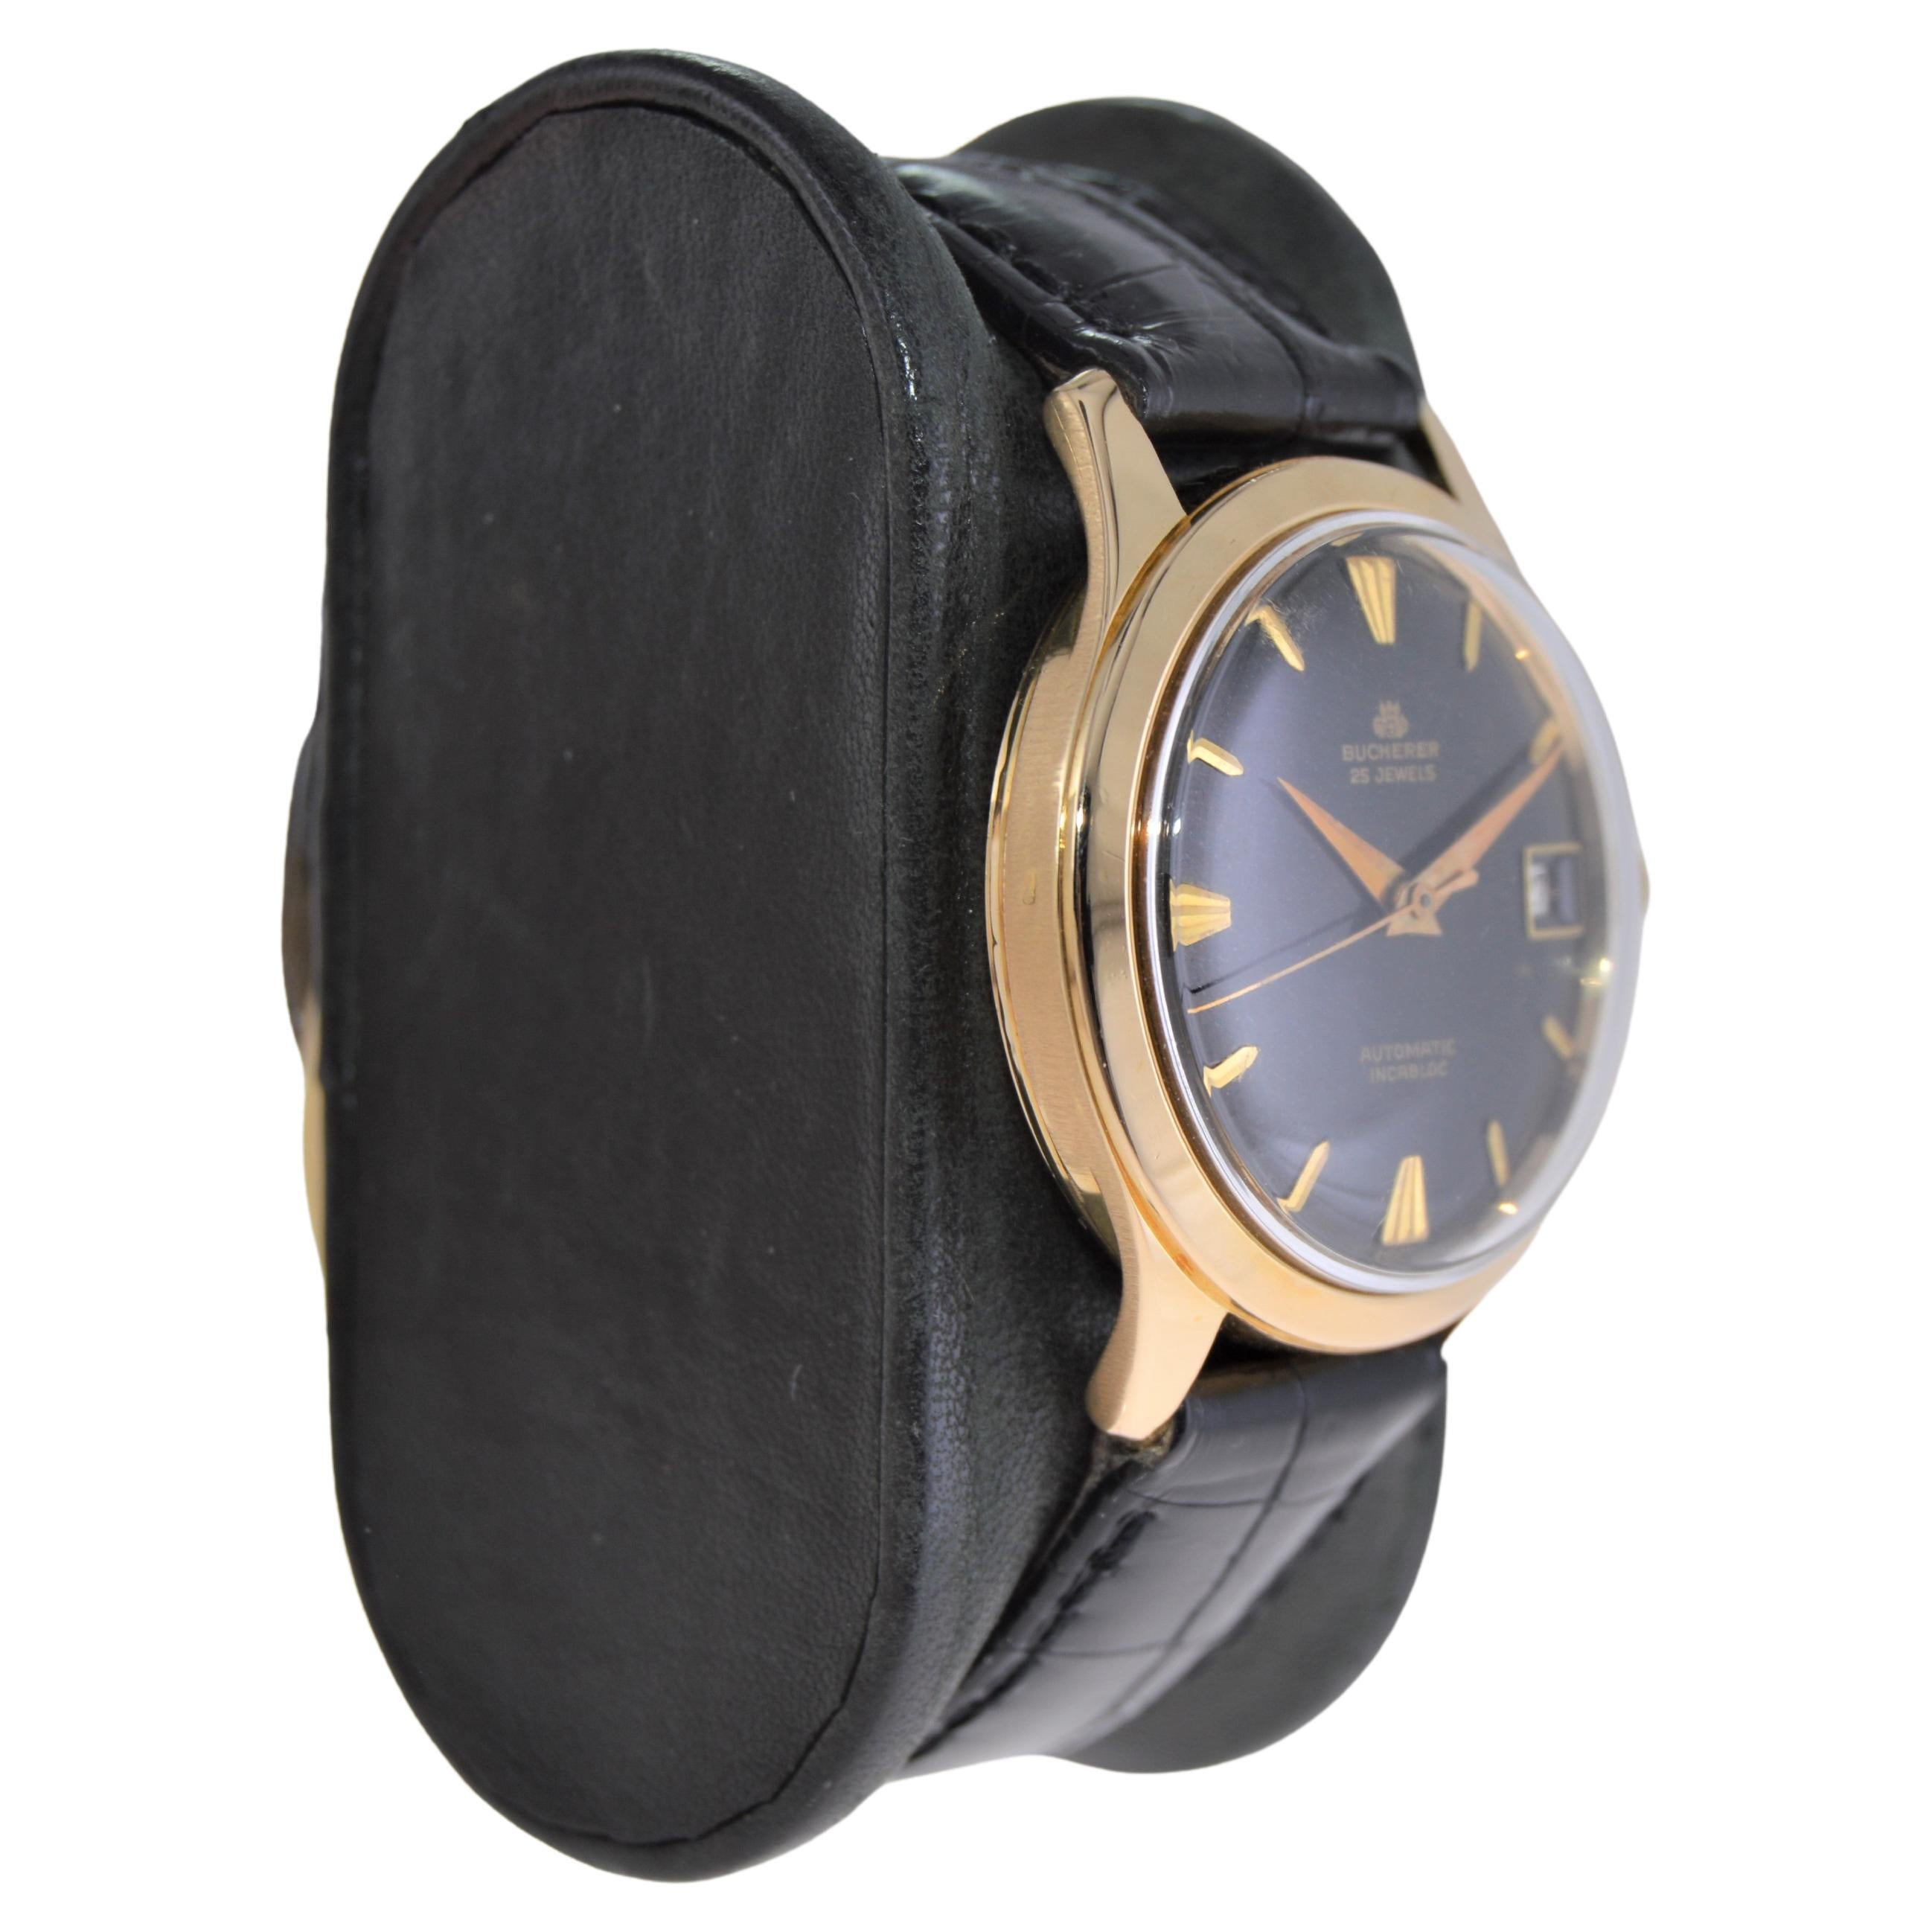 FACTORY / HOUSE: Bucherer 
STYLE / REFERENCE: Art Deco / Round 
METAL / MATERIAL: 18Kt.  Yellow Gold 
CIRCA / YEAR: 1950's
DIMENSIONS / SIZE: Length 40mm X Diameter 33mm
MOVEMENT / CALIBER: Manual Winding / 25 Jewels  
DIAL / HANDS: Original Black